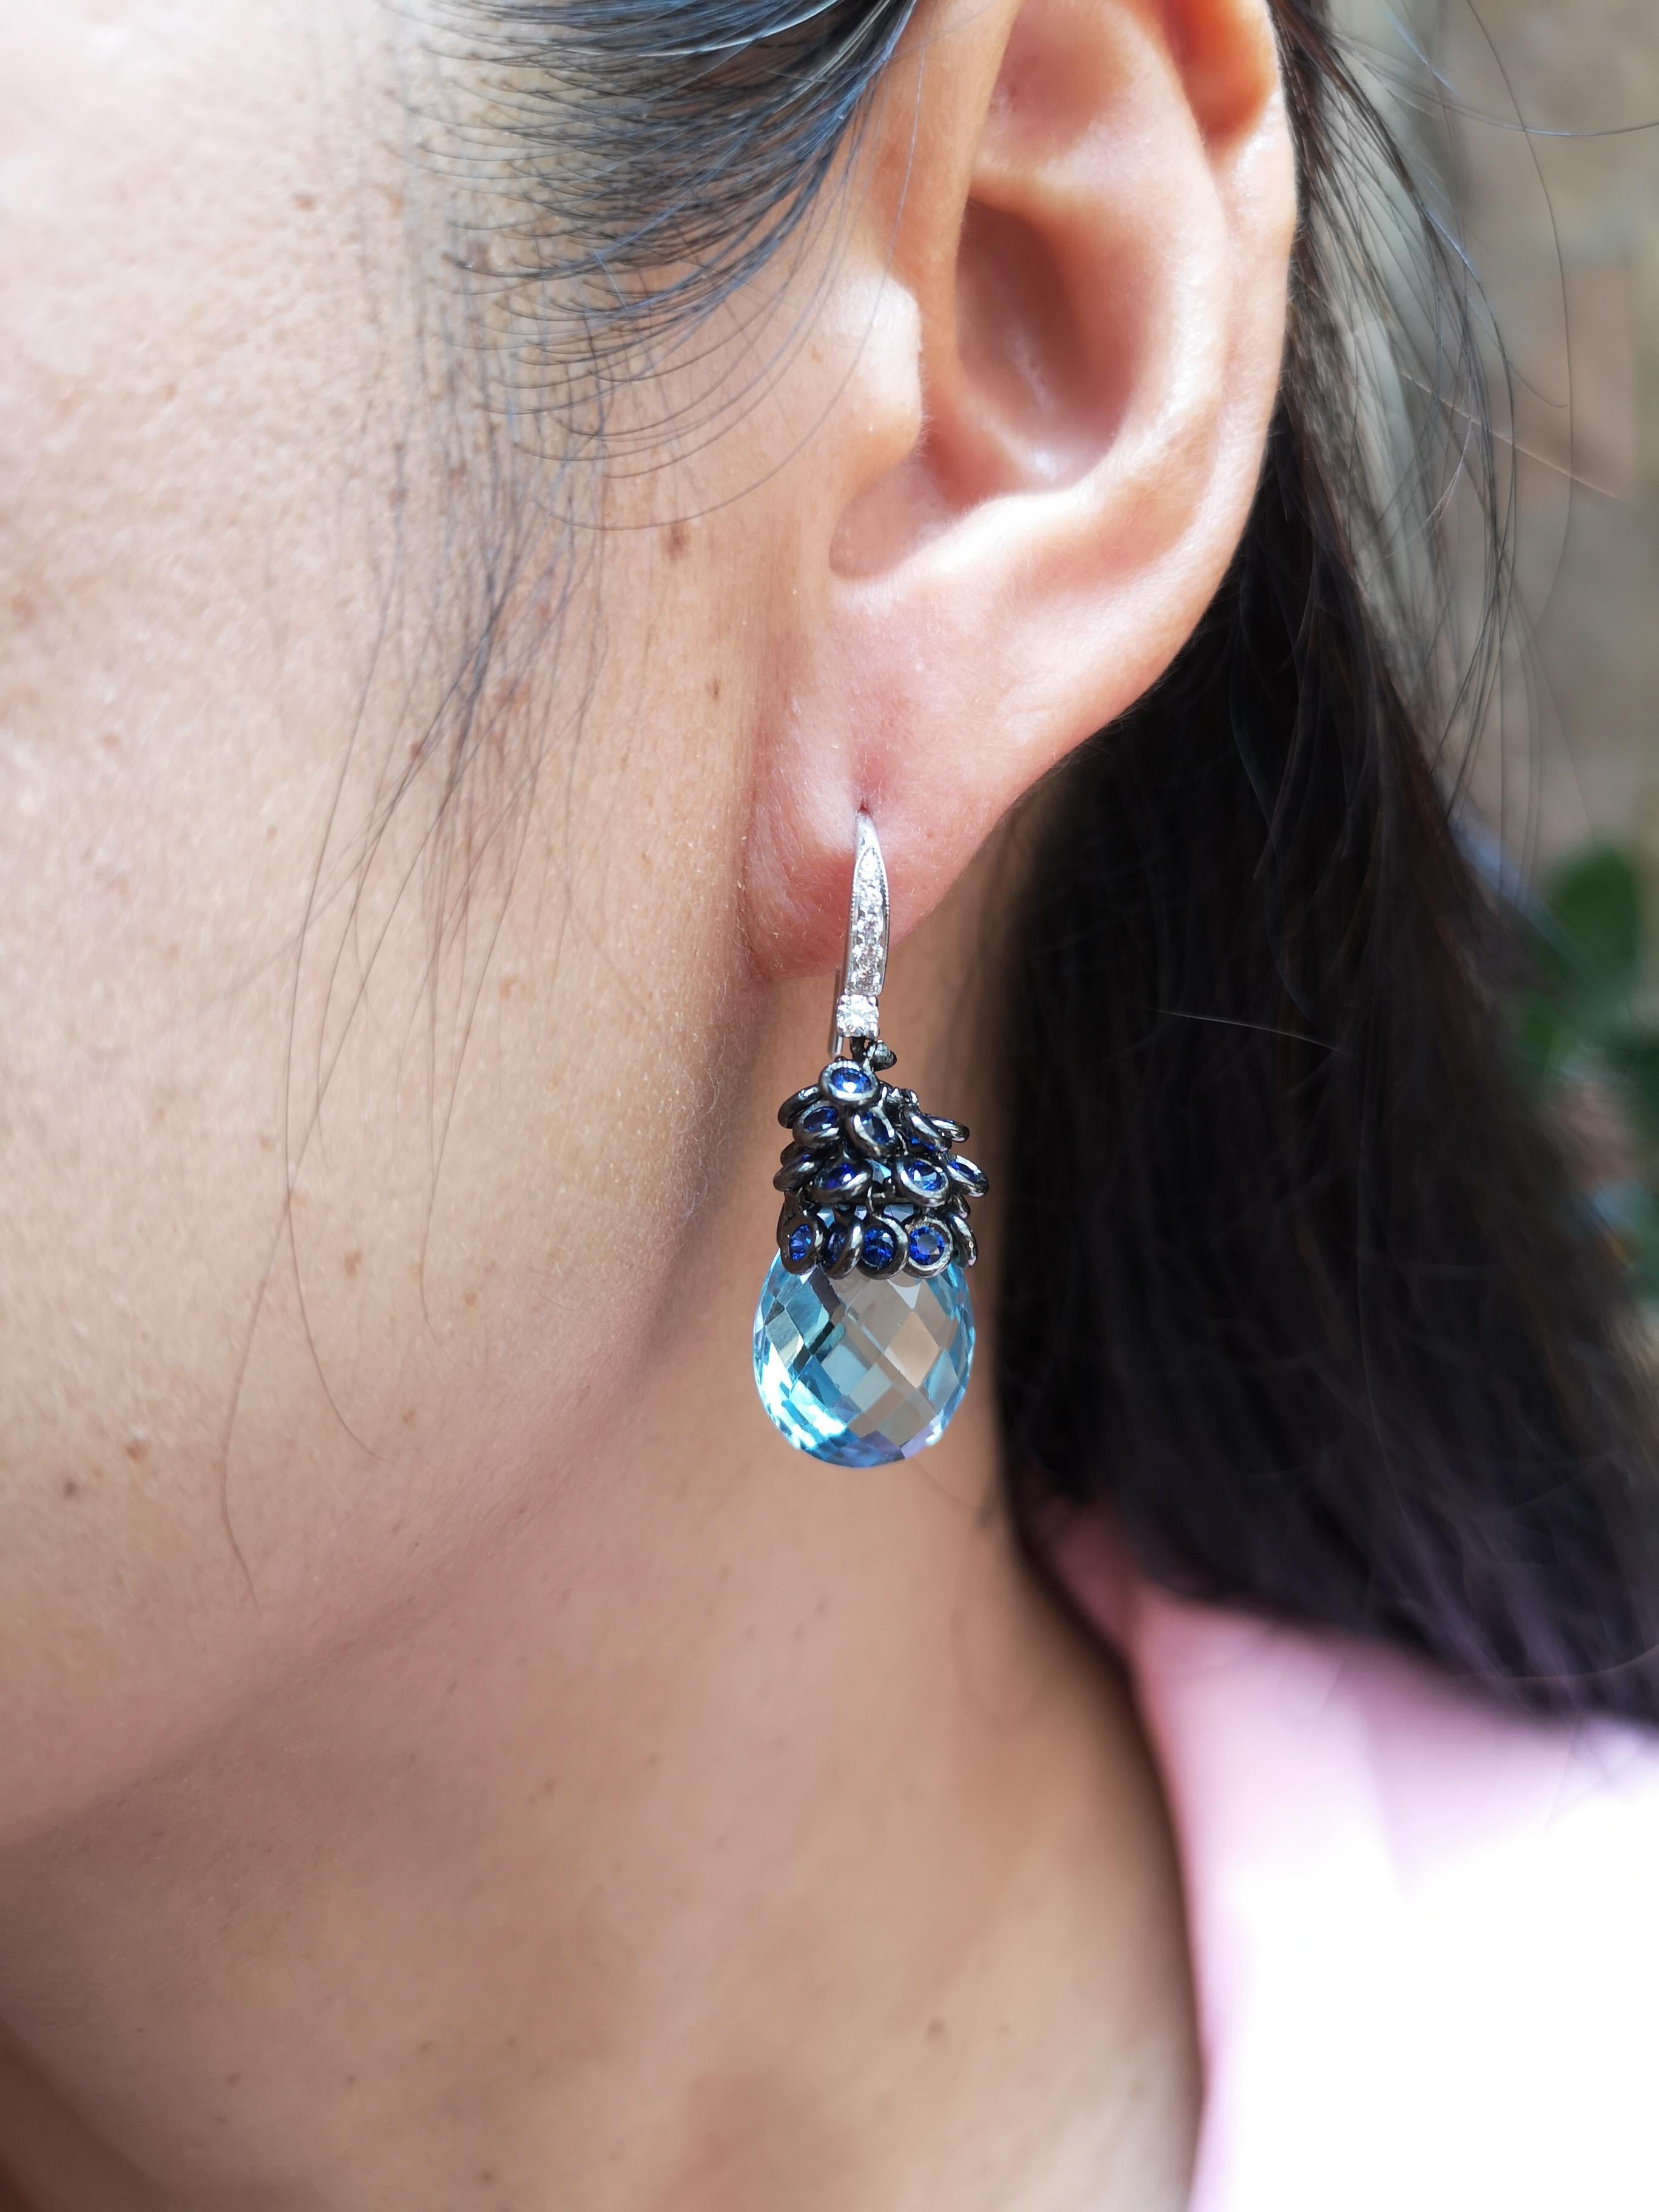 Blue Topaz 19.01 carats with Blue Sapphire 2.20 carats and Diamond 0.21 carat Earrings set in 18 Karat White Gold Settings

Width:  1.5 cm 
Length: 3.5 cm
Total Weight: 14.22 grams

